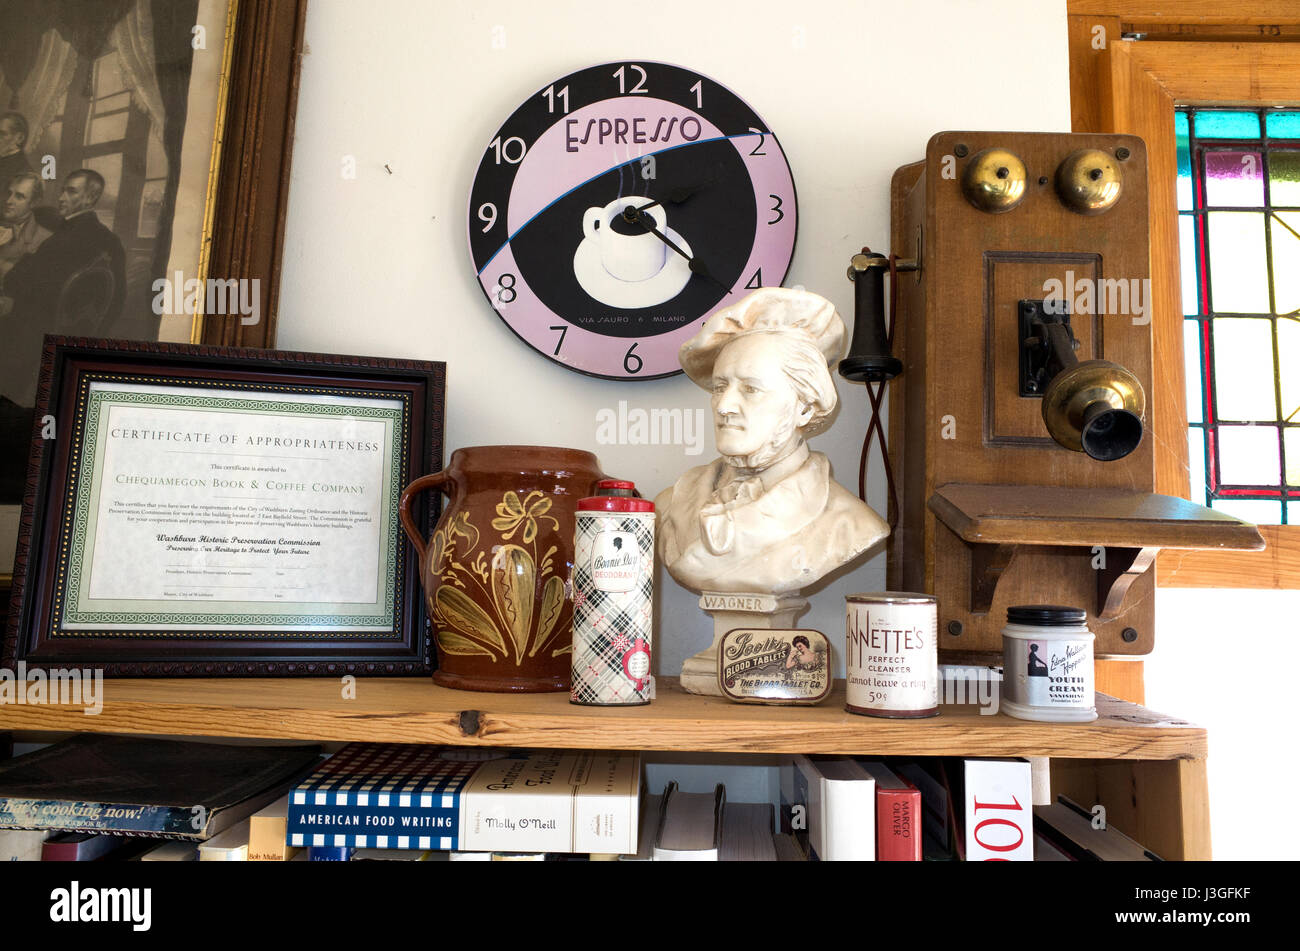 Shelf at coffee shop with espresso clock, old telephone, bust of Wagner, various jars, and certificate of appropriateness. Washburn Wisconsin WI USA Stock Photo